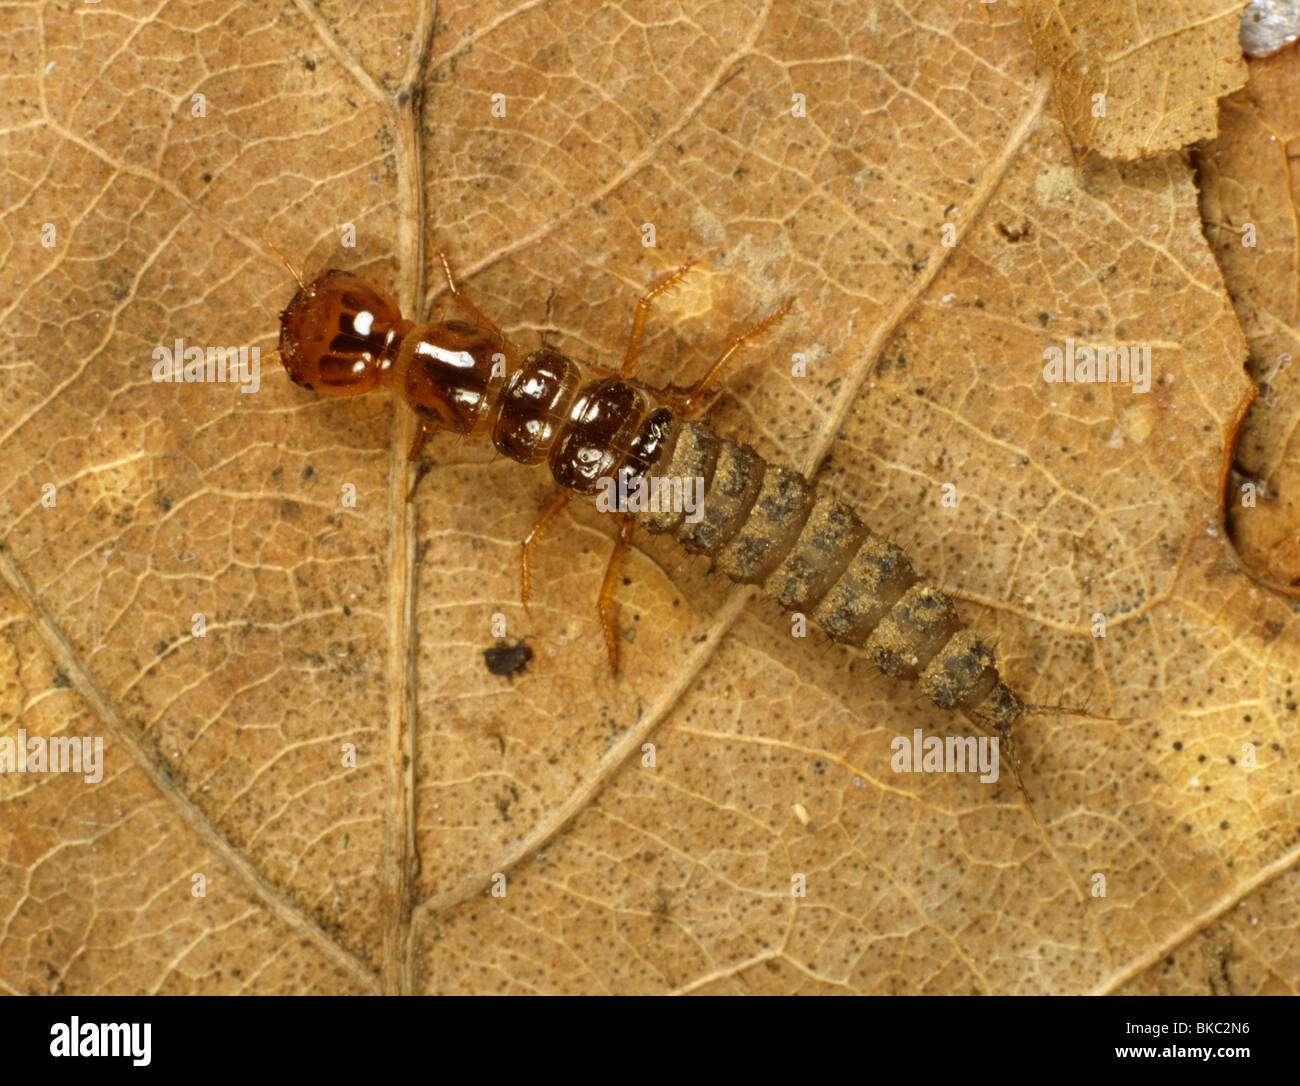 A ground beetle larva (Carabidae) unidentified predator of small insects Stock Photo